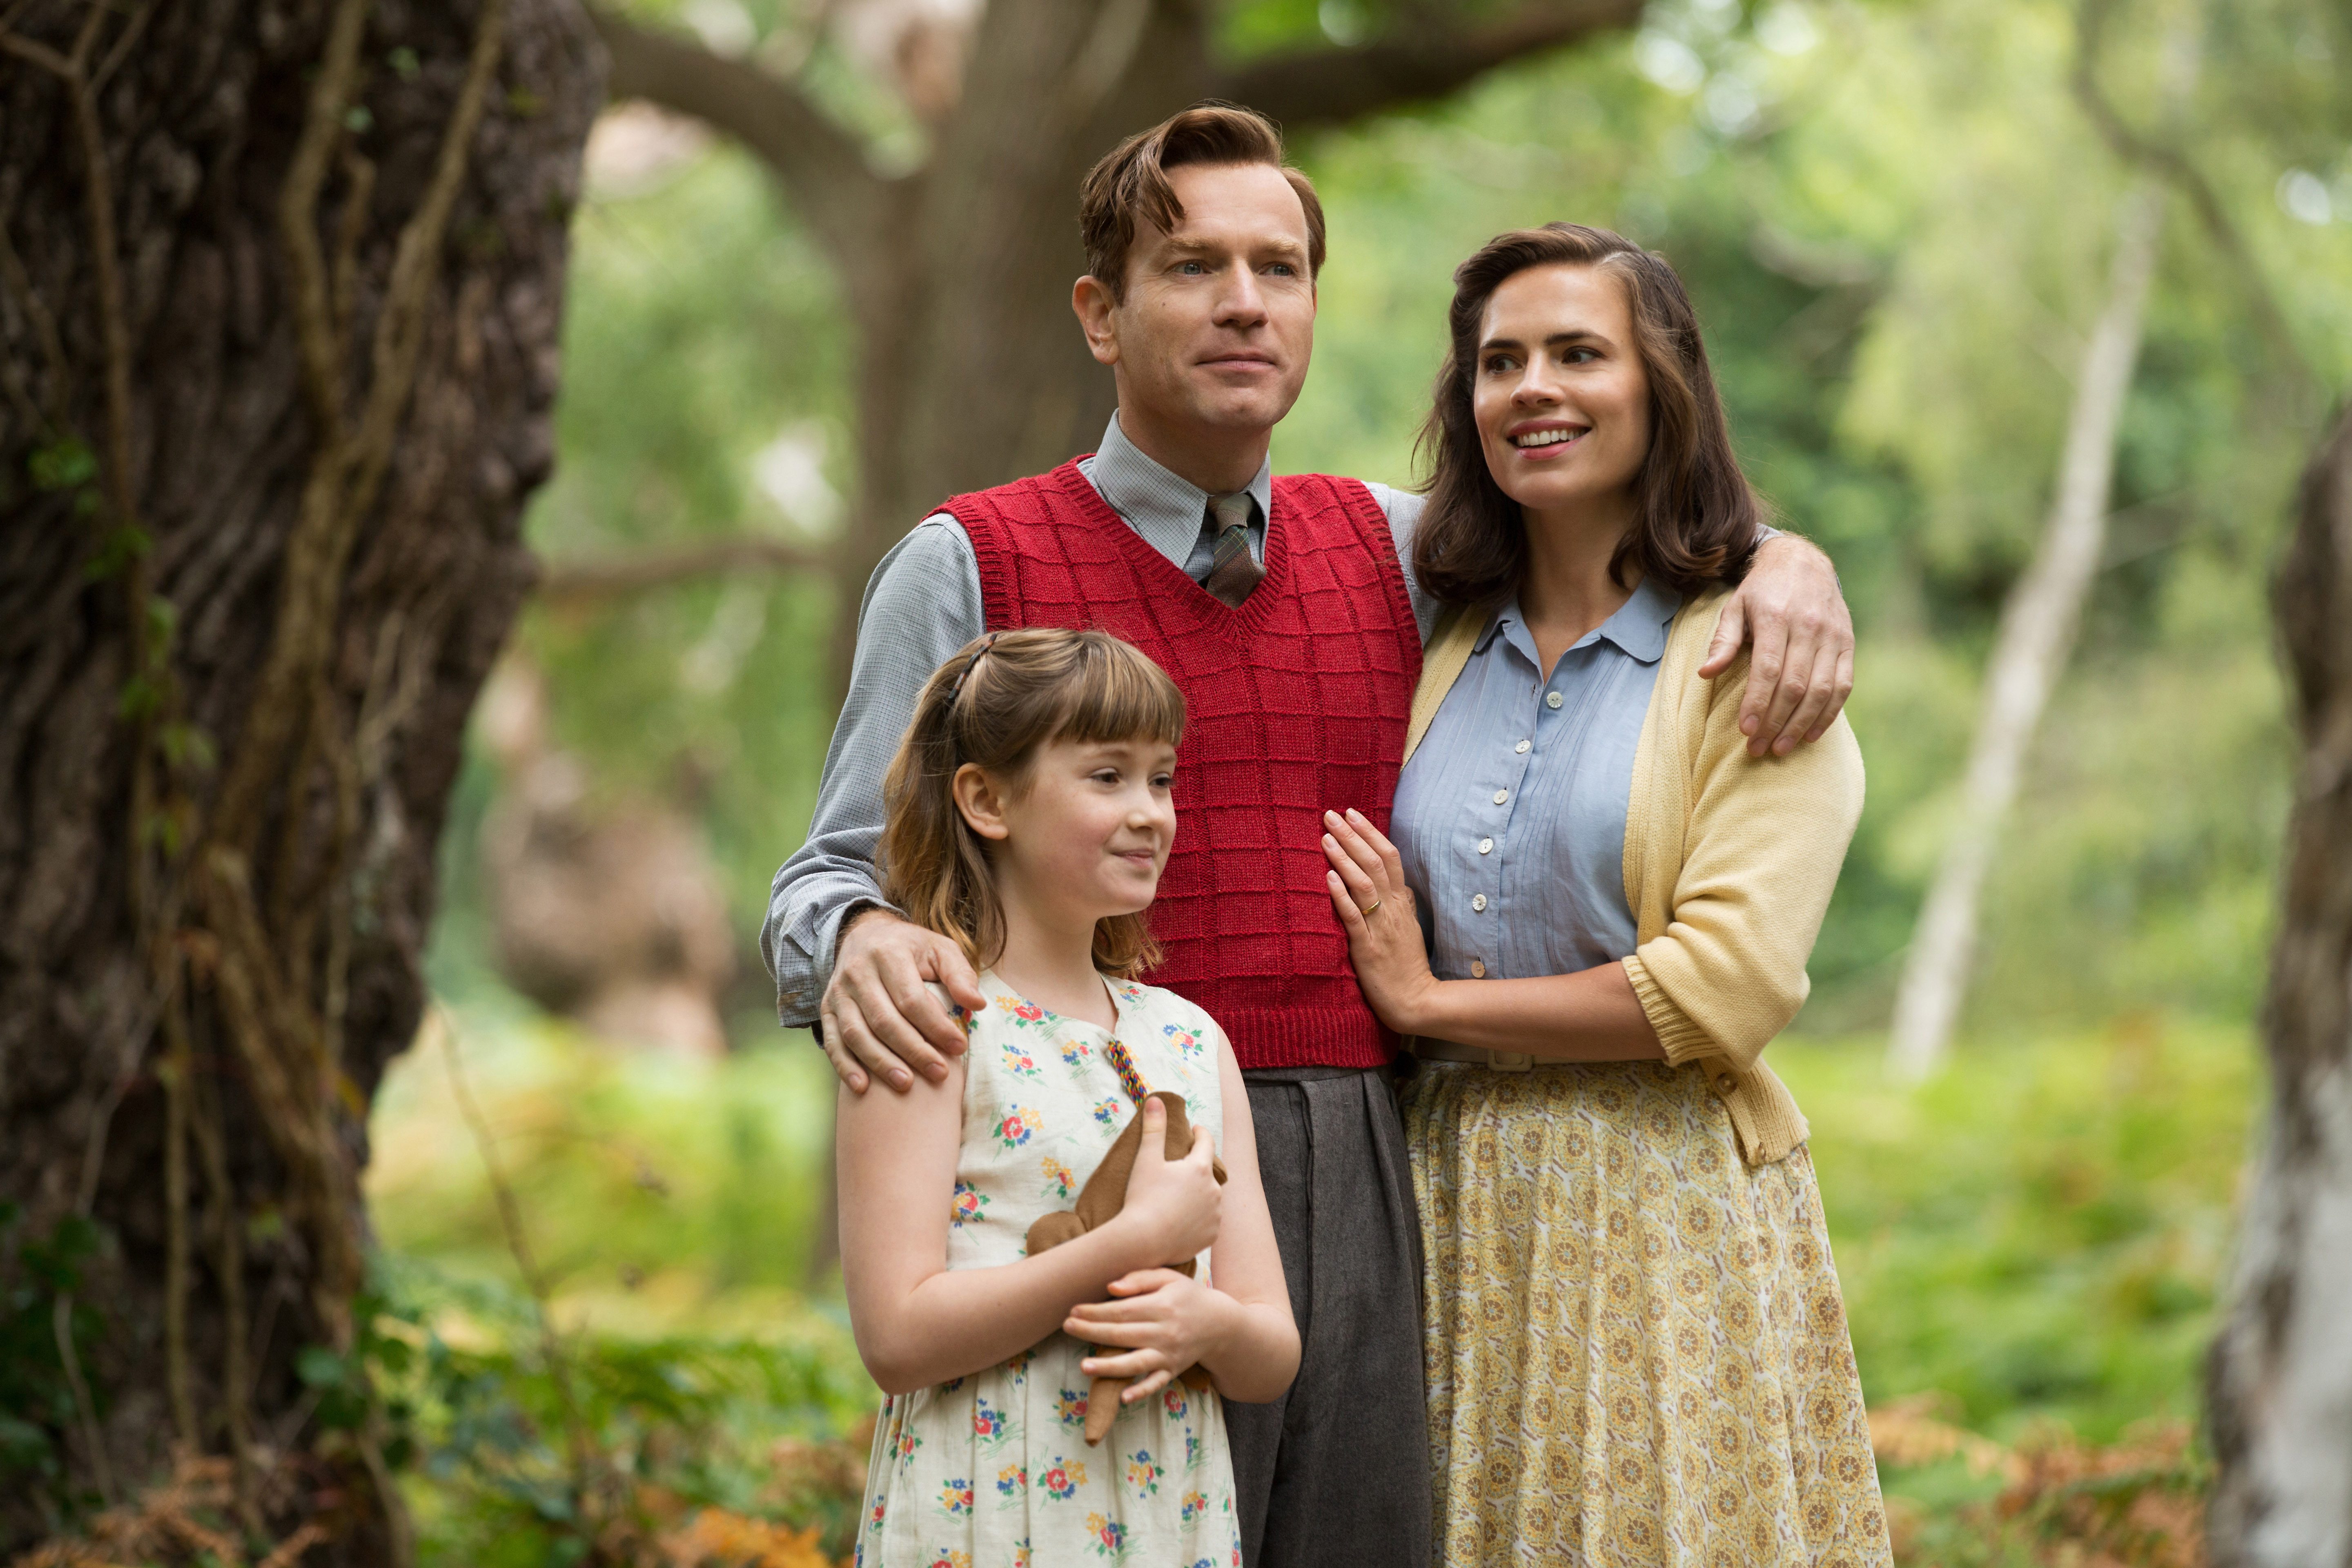 GROWN UP.  Christopher Robin now grown up with his family- daughter Madeline and wife Evelyn. 